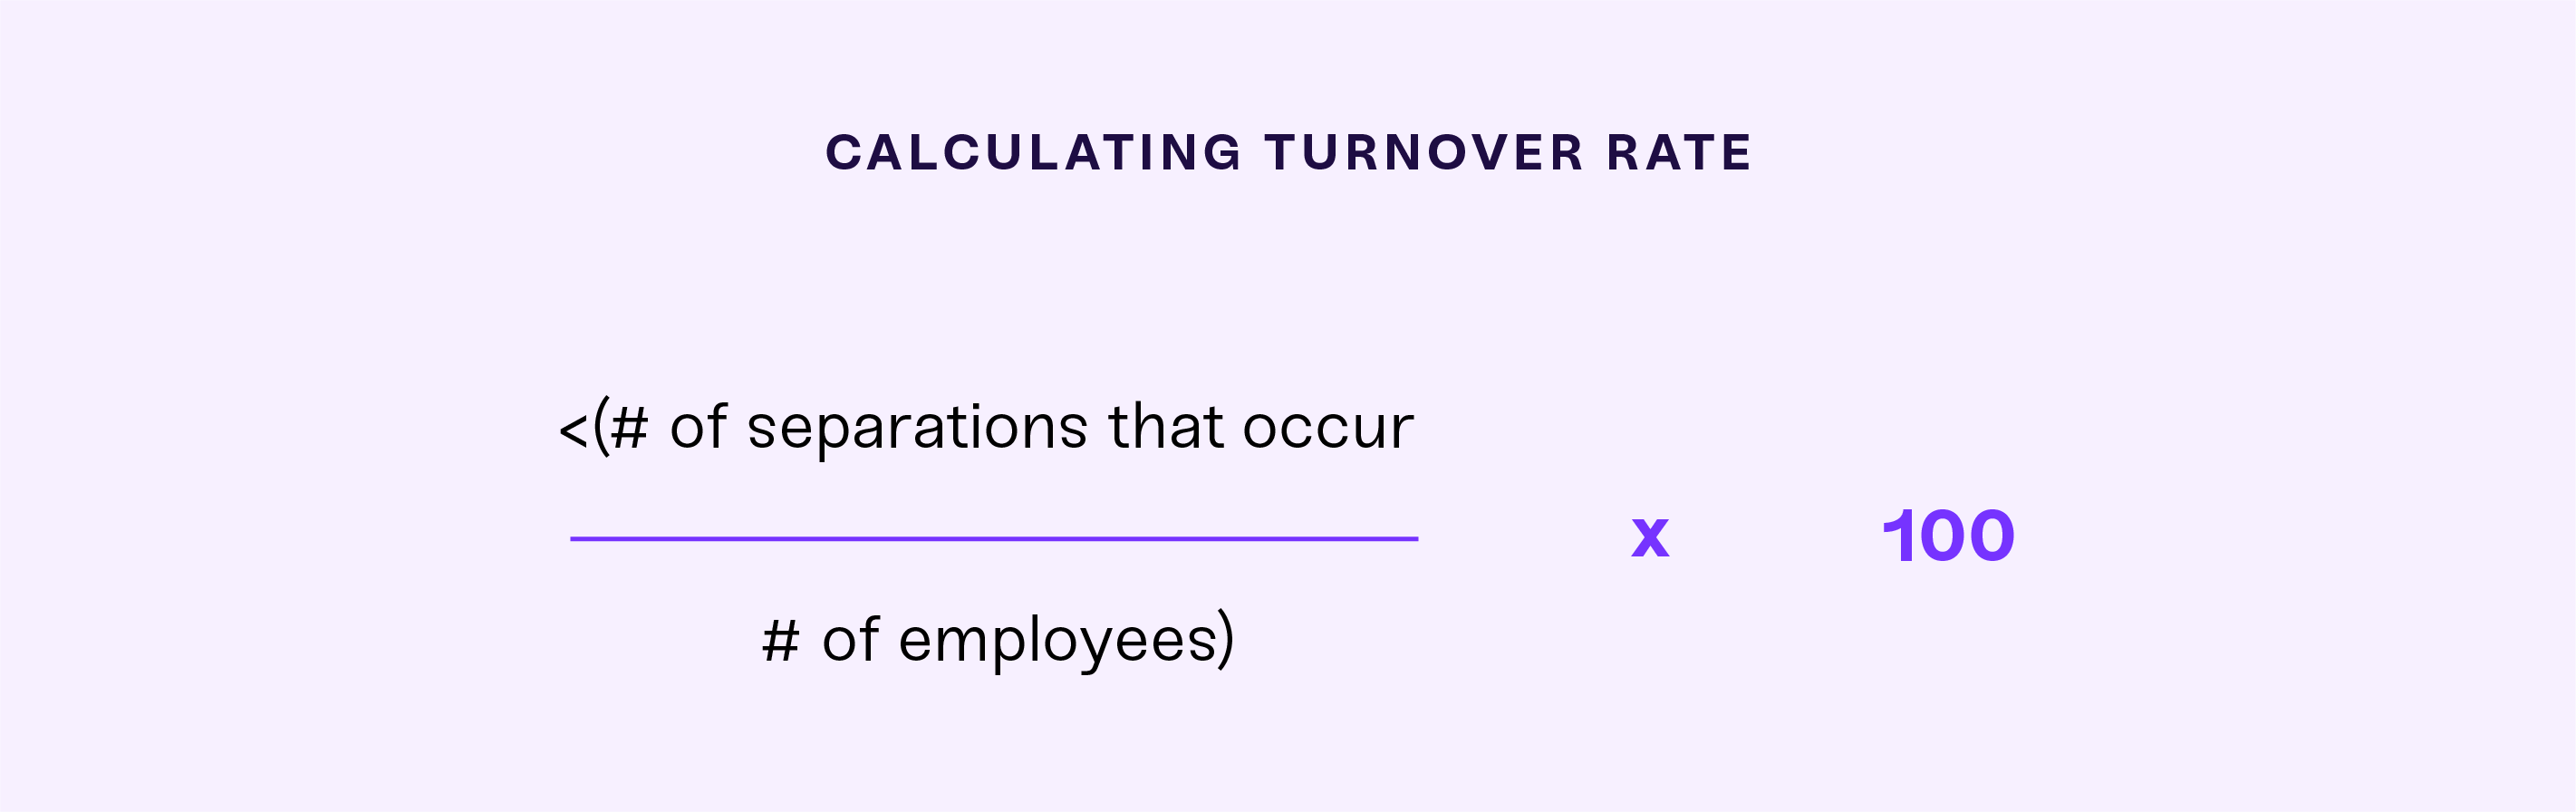 turnover rate equation